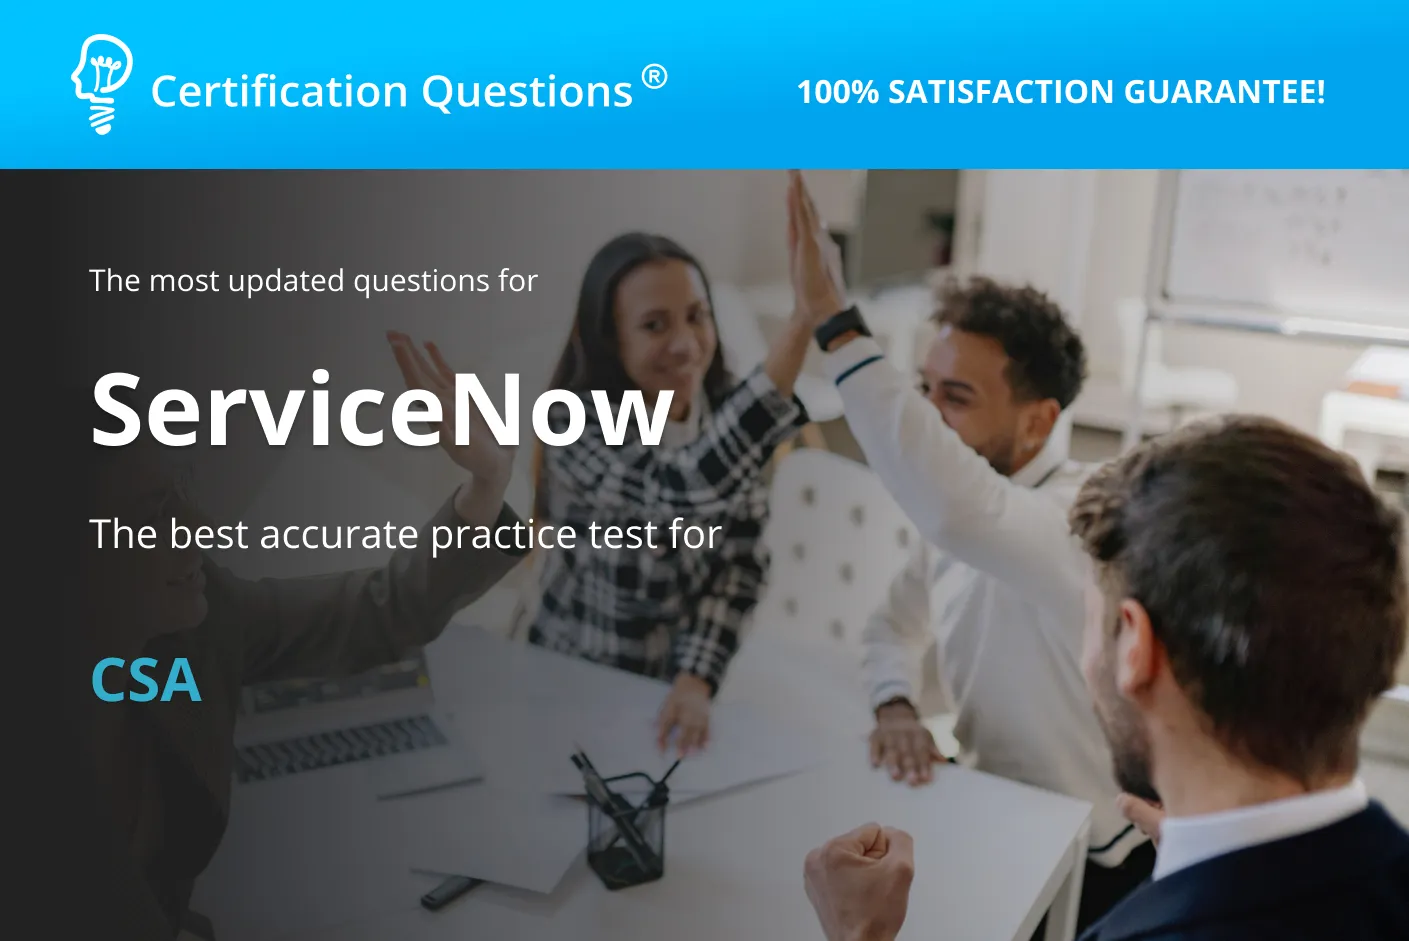 This image represents the Servicenow CSA exam practice test in the USA